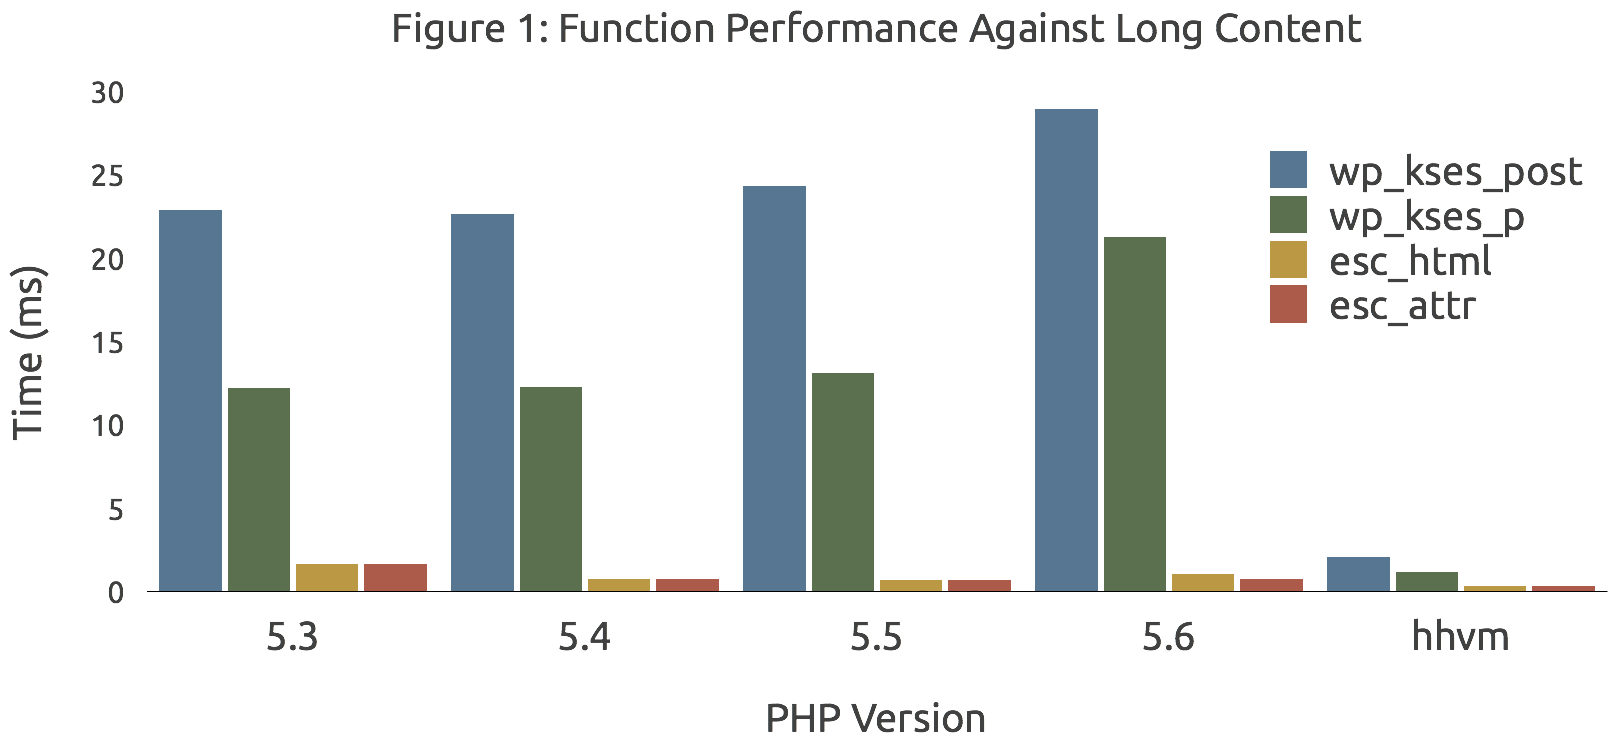 A deep dive into wp_kses performance that you must read, even if you don’t care about wp_kses